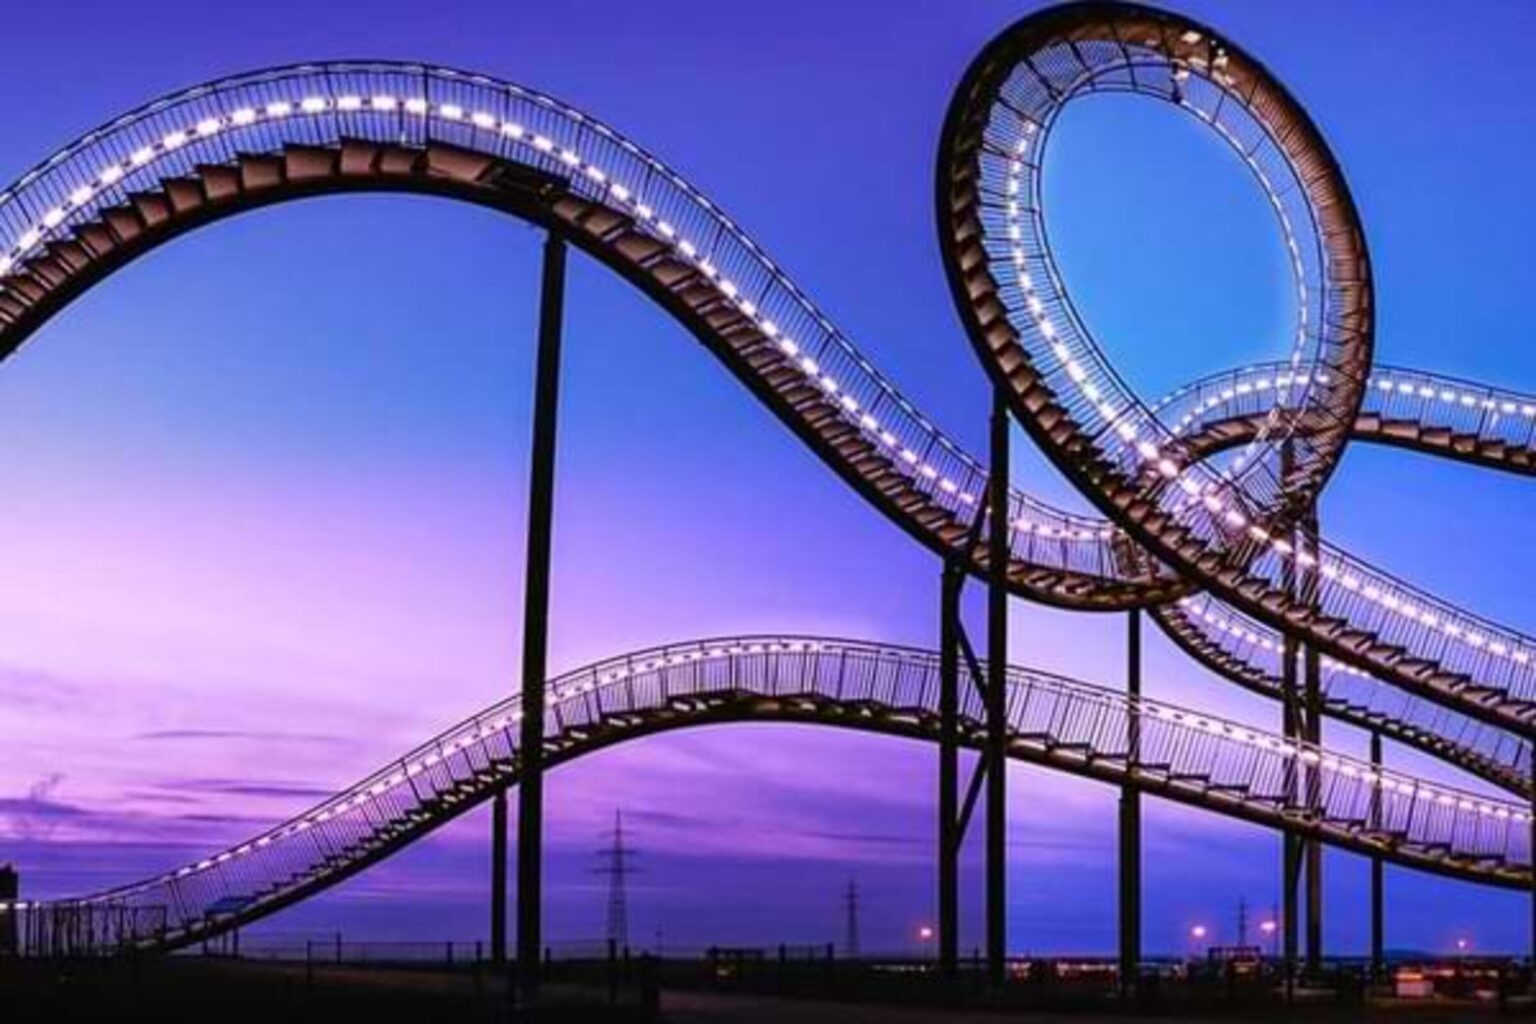 Get a rush riding the top 10 tallest roller coasters in the world